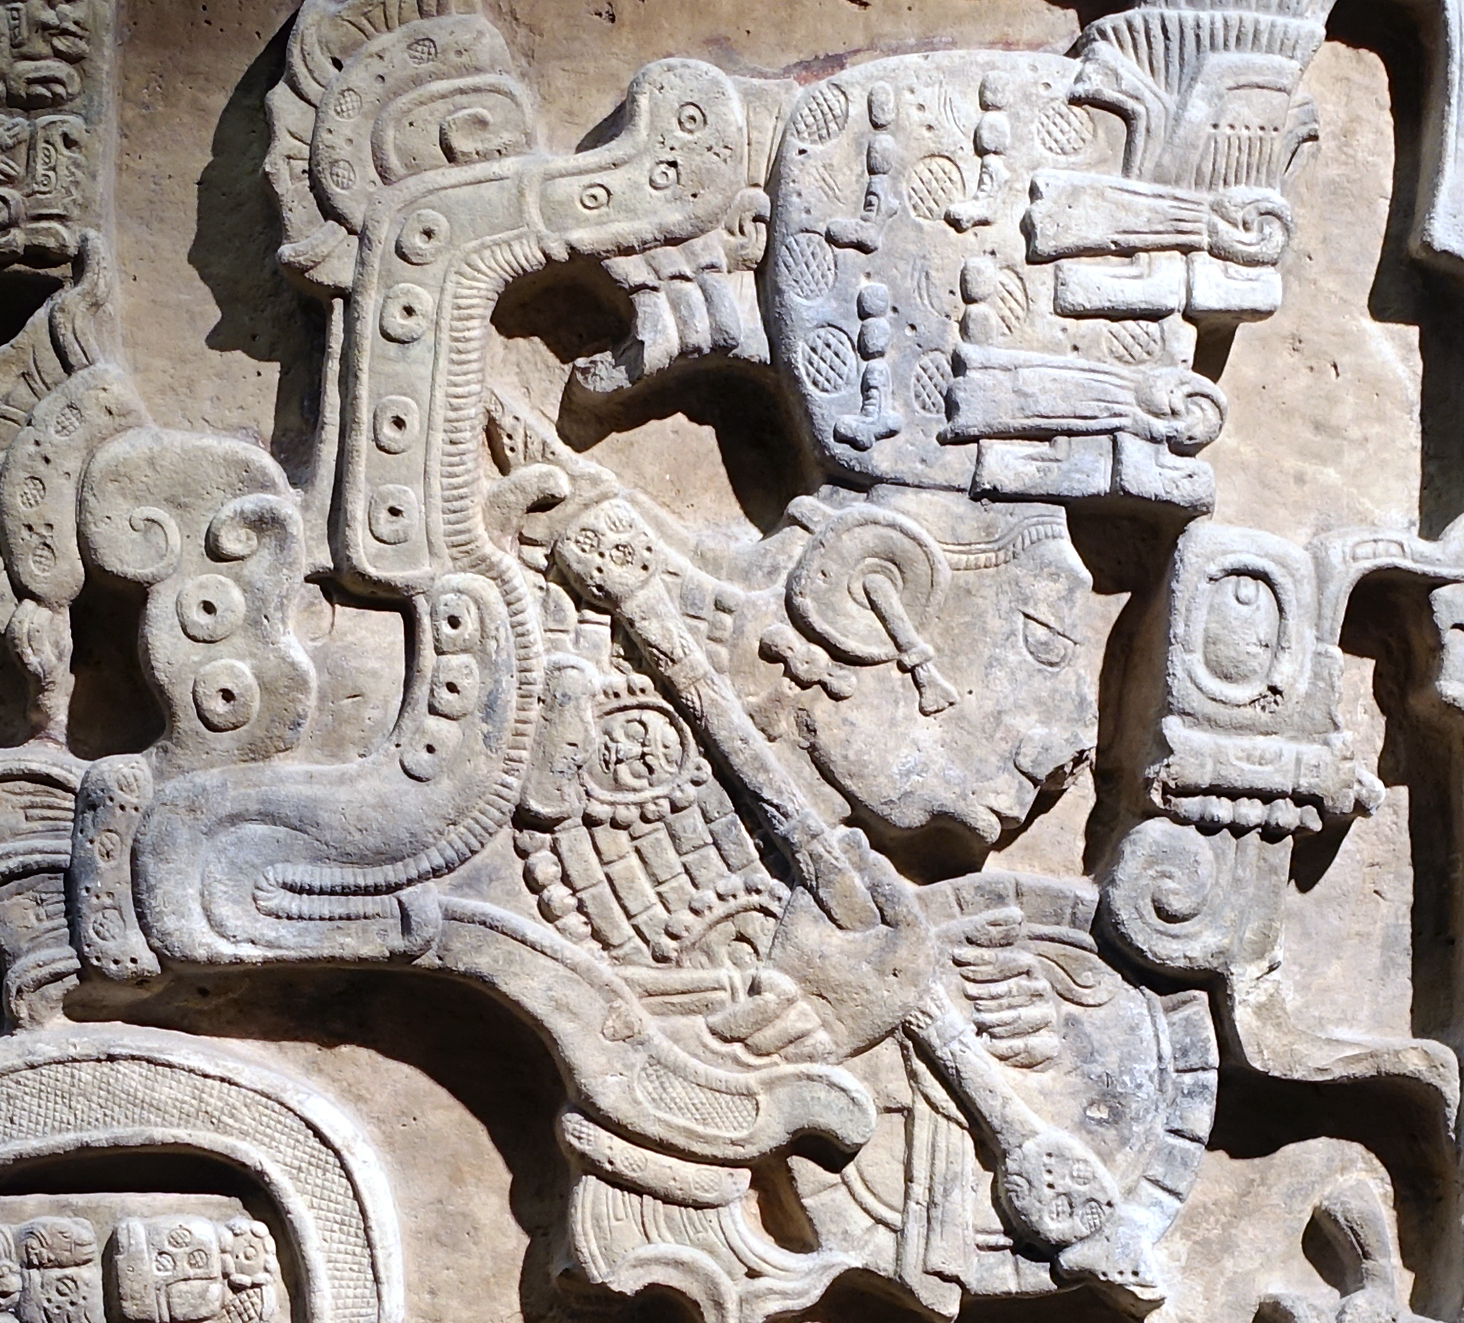 A figure emerges from the open mouth of a vision serpent (detail), Lintel 25, Structure 23, Yaxchilán (Maya) (The British Museum)